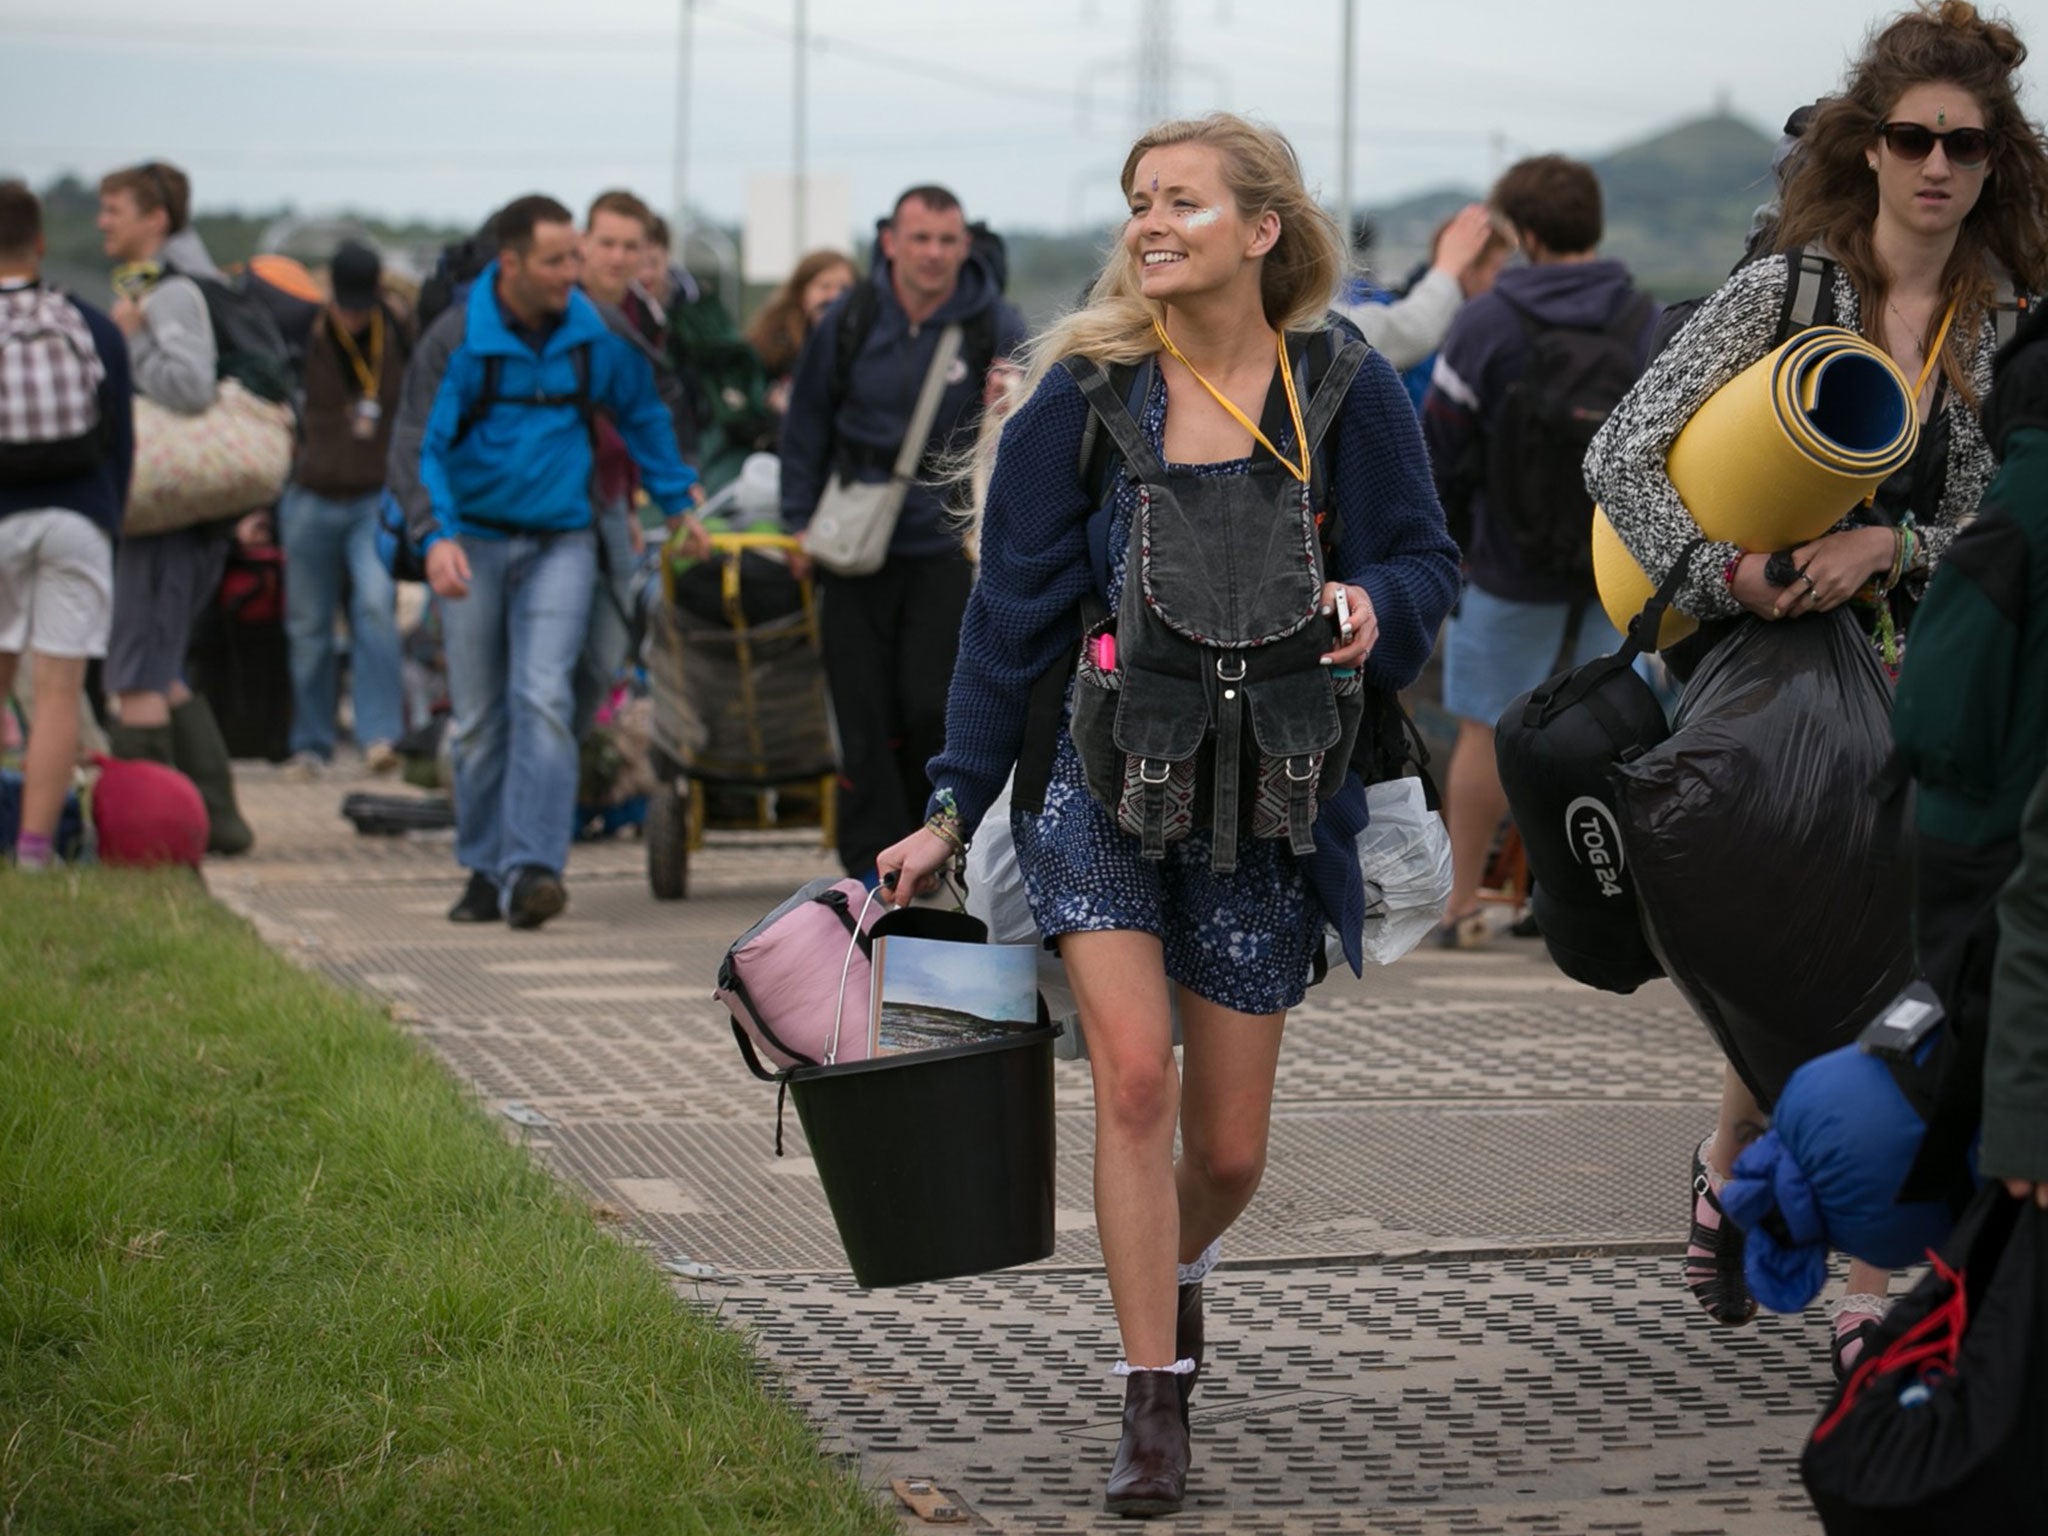 Festival goers arrive at Worthy Farm in Pilton for the first day of the 2014 Glastonbury Festival